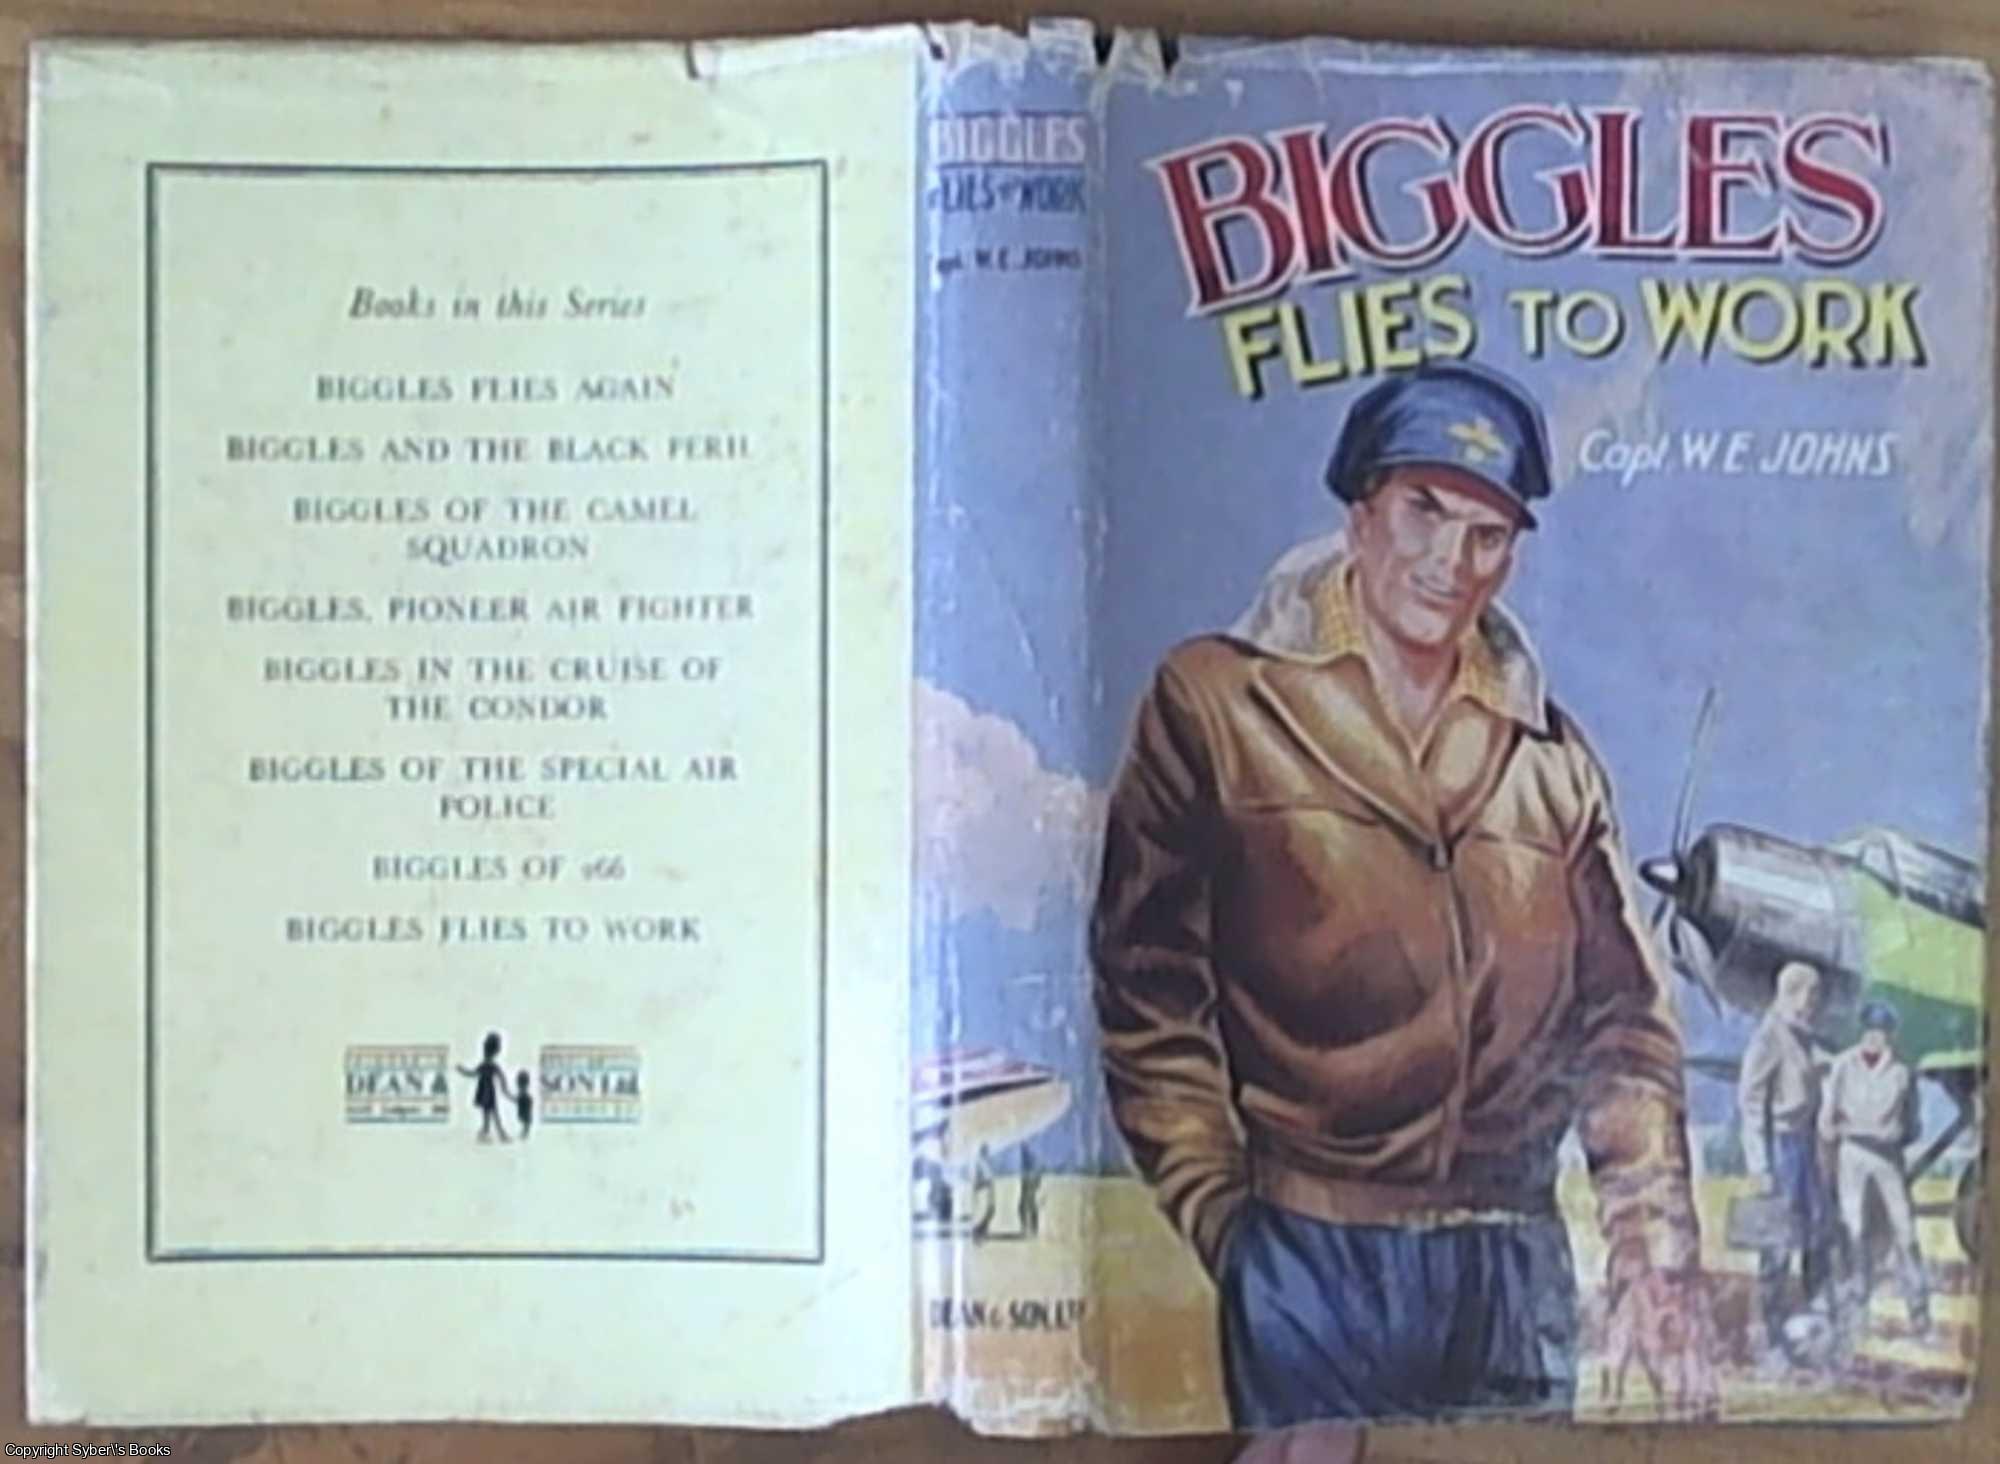 Johns, Captain W. E. (William Earle) - Biggles Flies to Work: Some Unusual Cases of Biggles and his Air Police